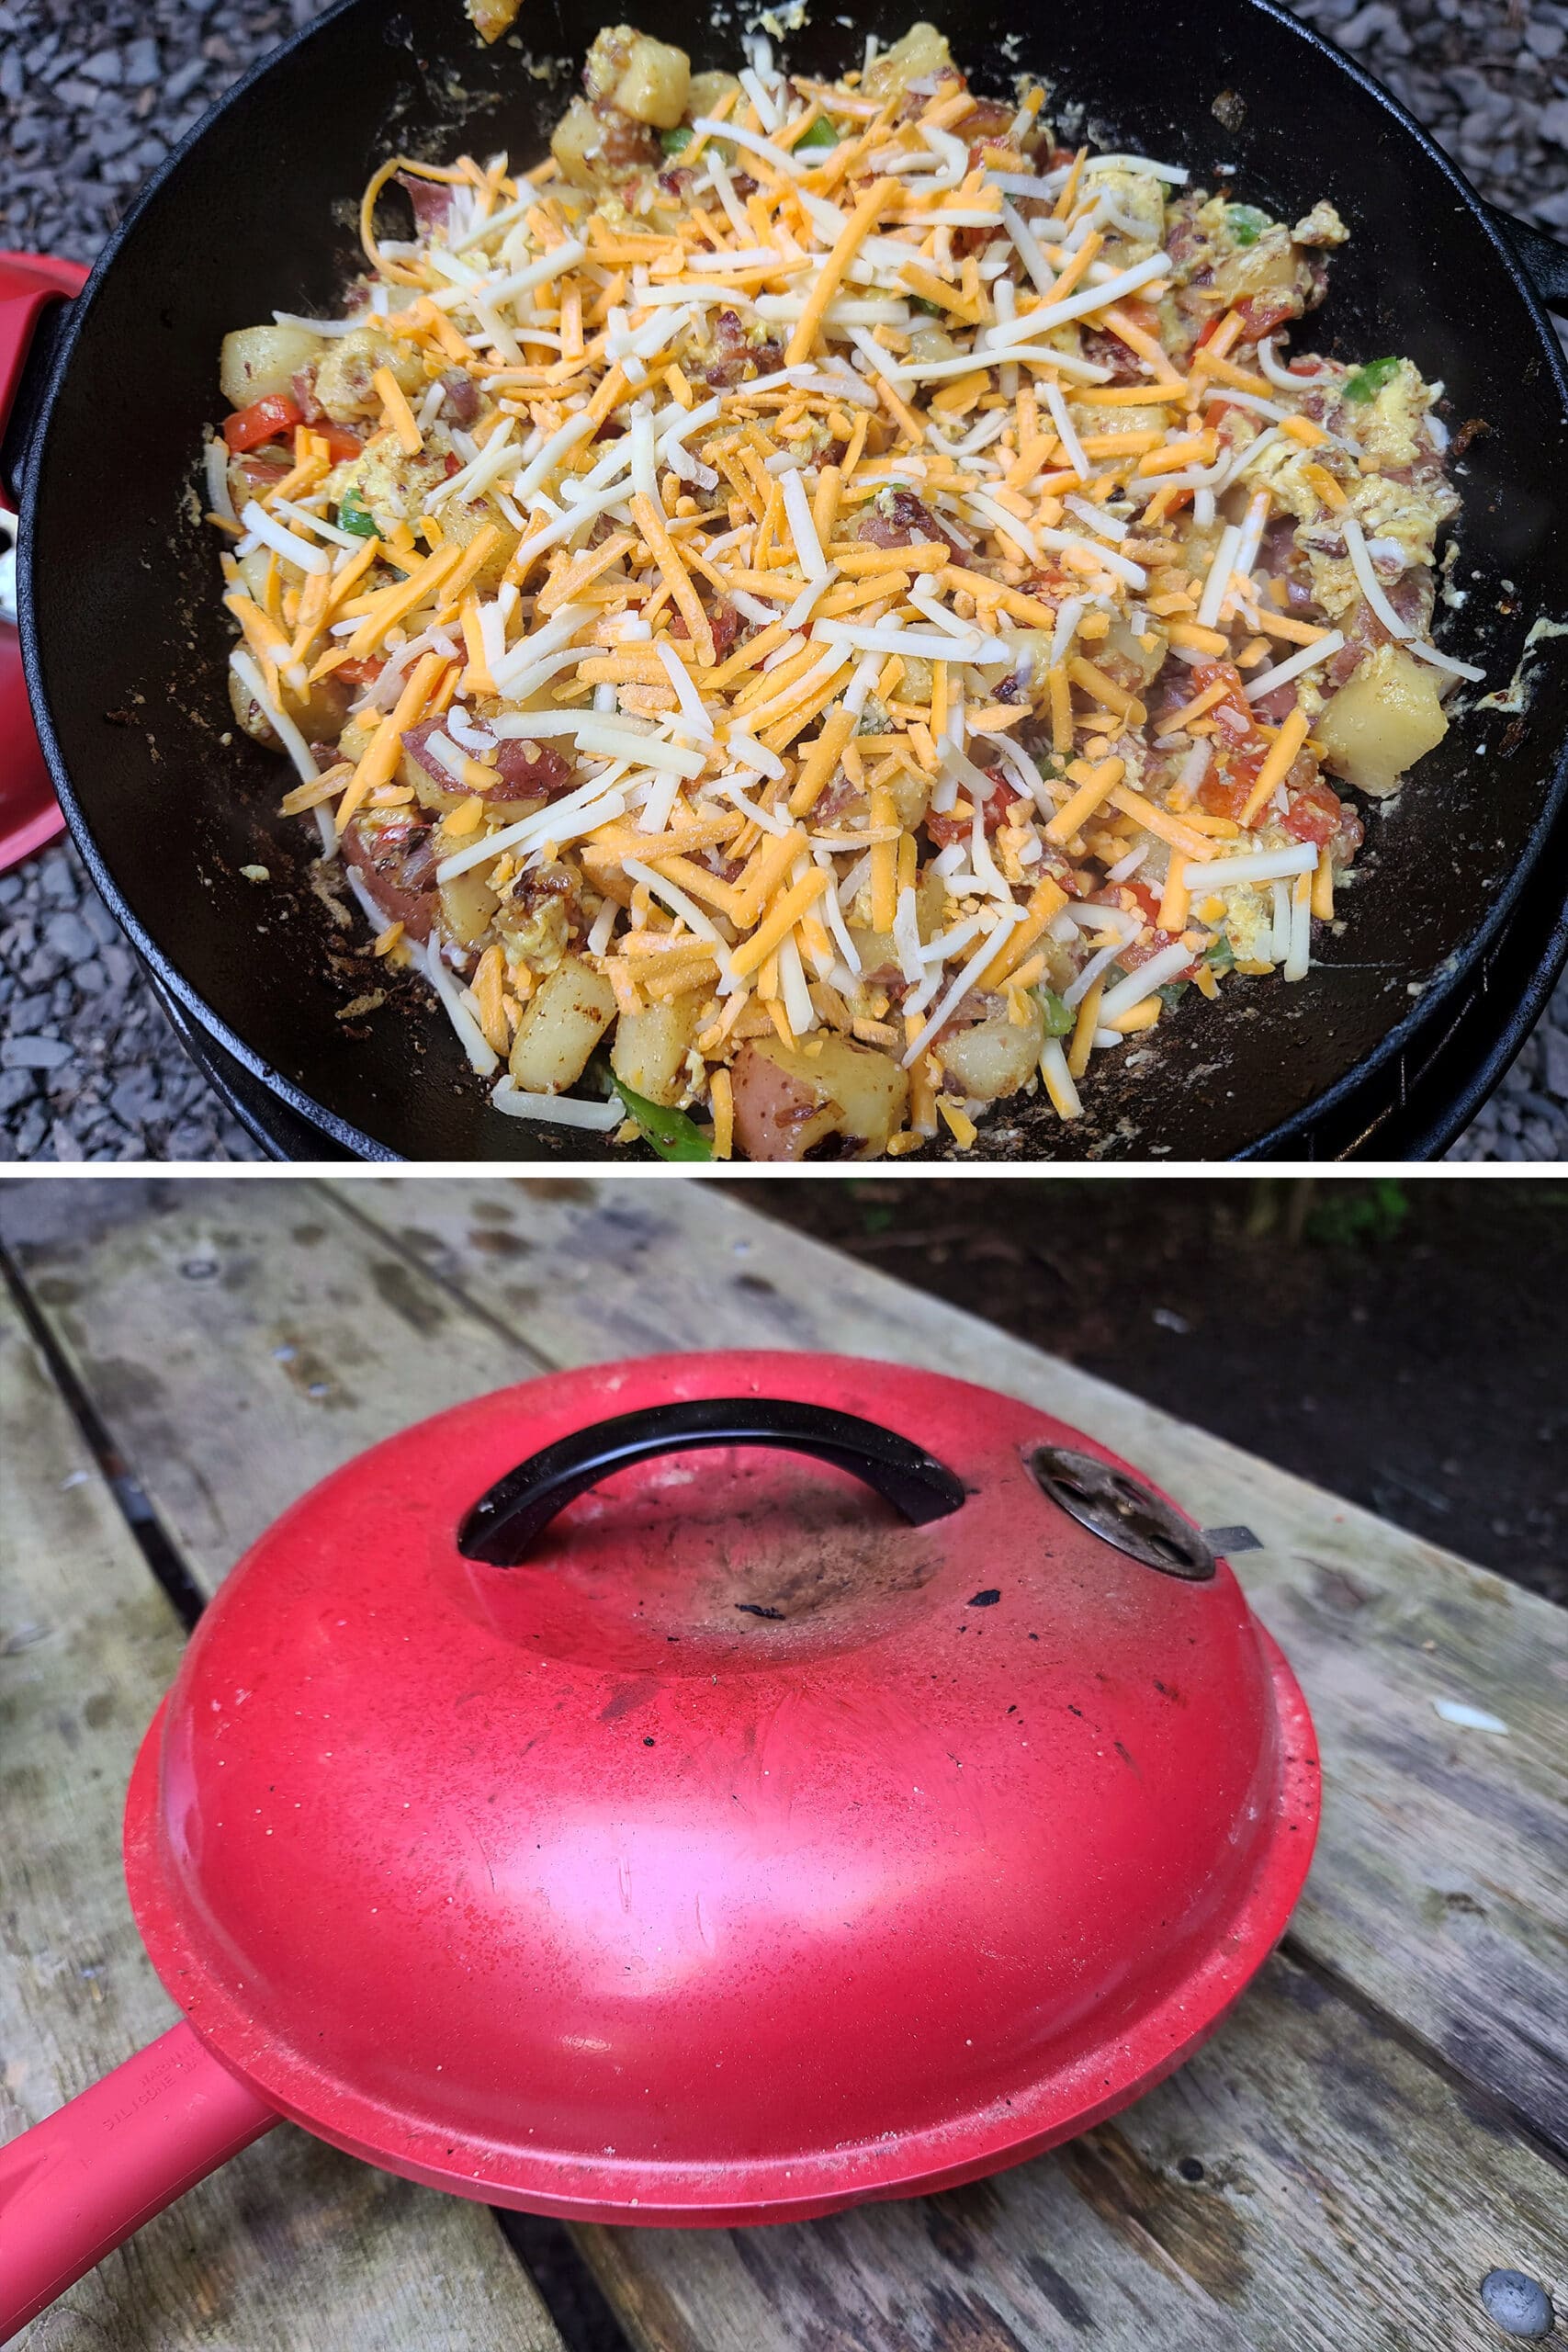 2 part image showing cheese being added to the top of the ingredients, then covered with the lid.